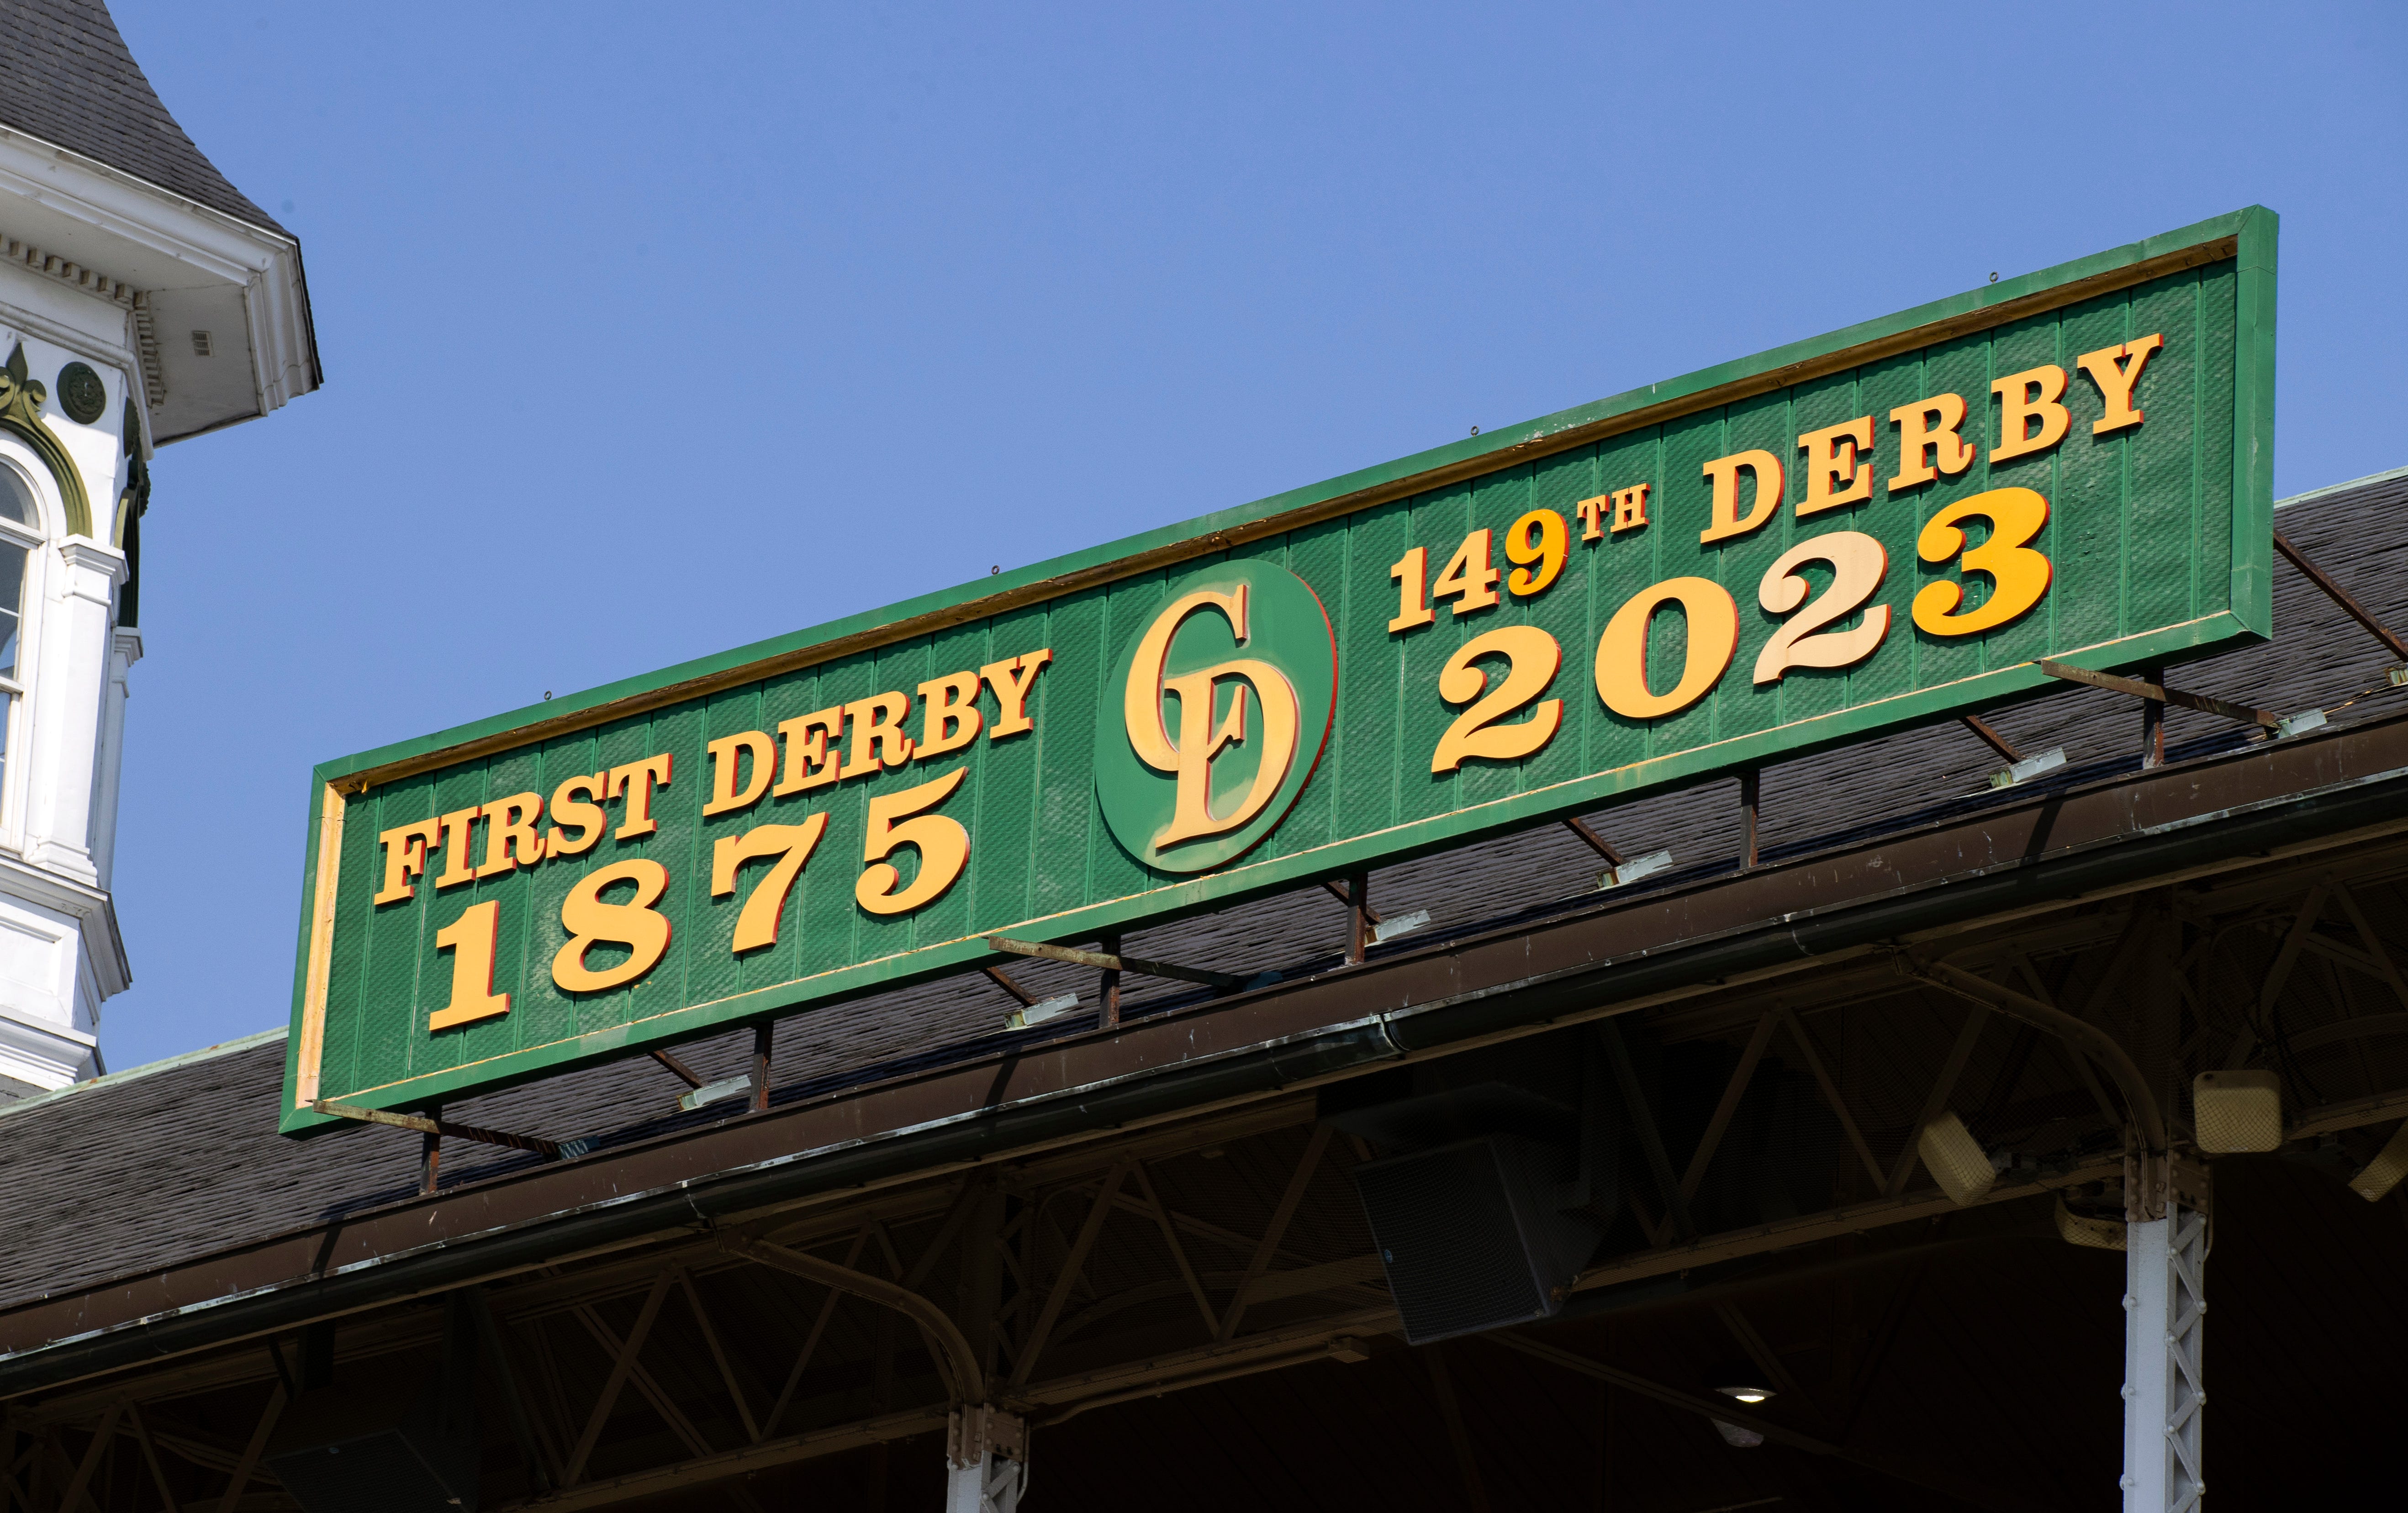 Kentucky Derby purse boosted to 5 million